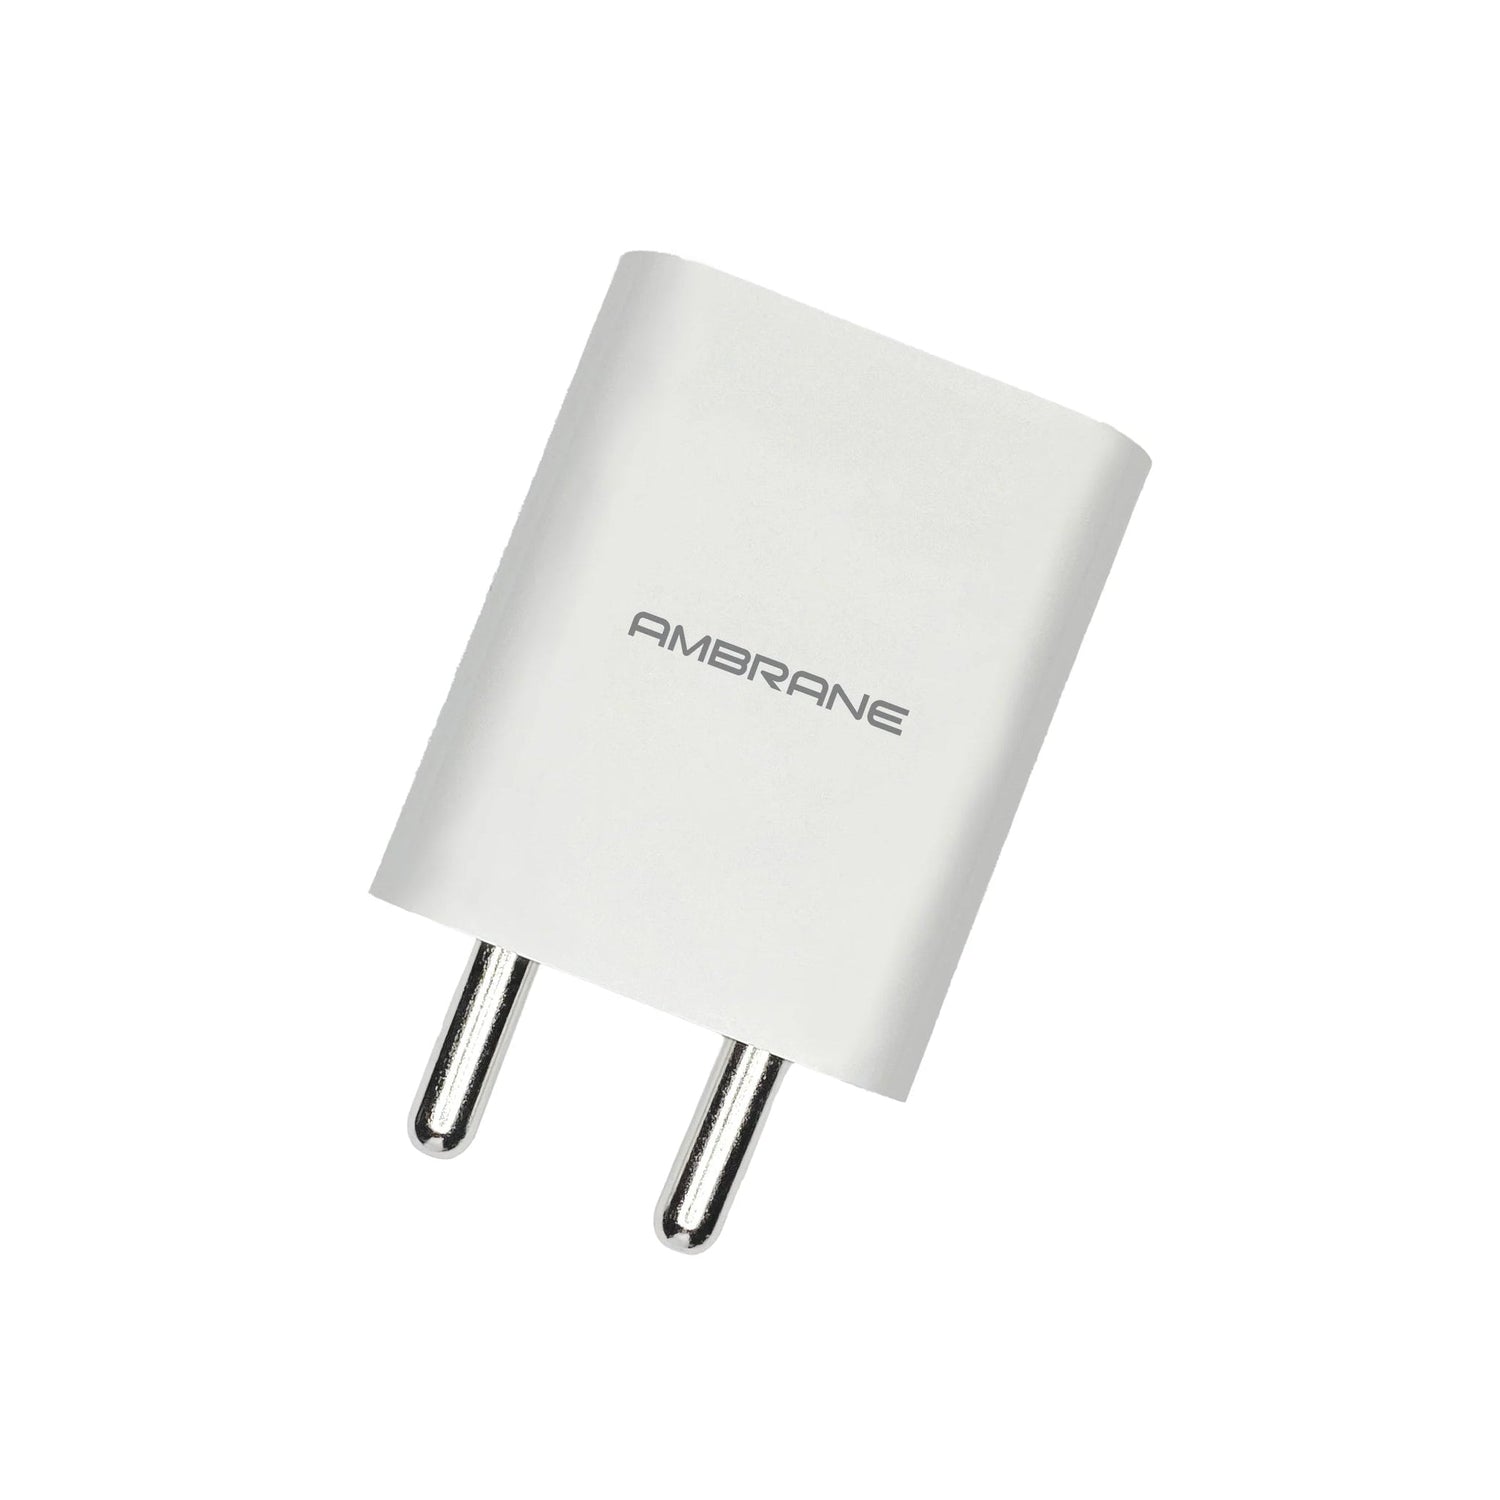 Ambrane Wall charger 2.1 with C Type cable - AWC-101